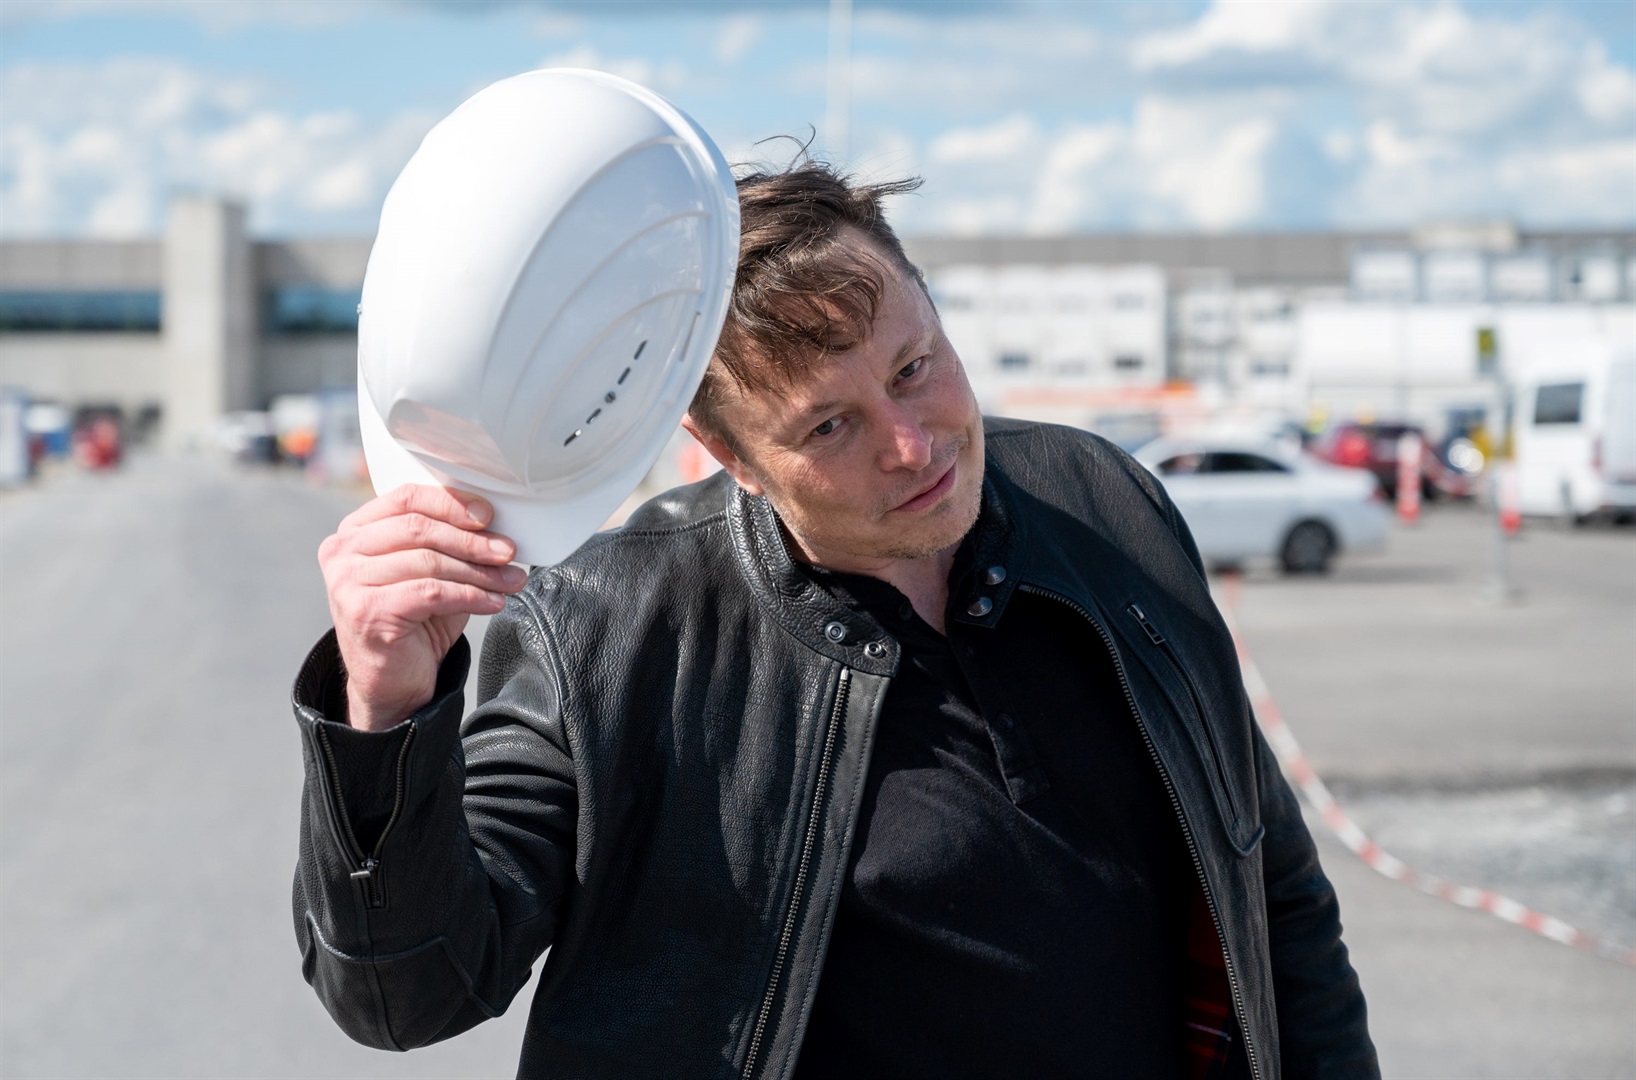 Elon Musk at the Tesla Grünheide site in May 2021. Christophe Gateau/picture alliance via Getty Images